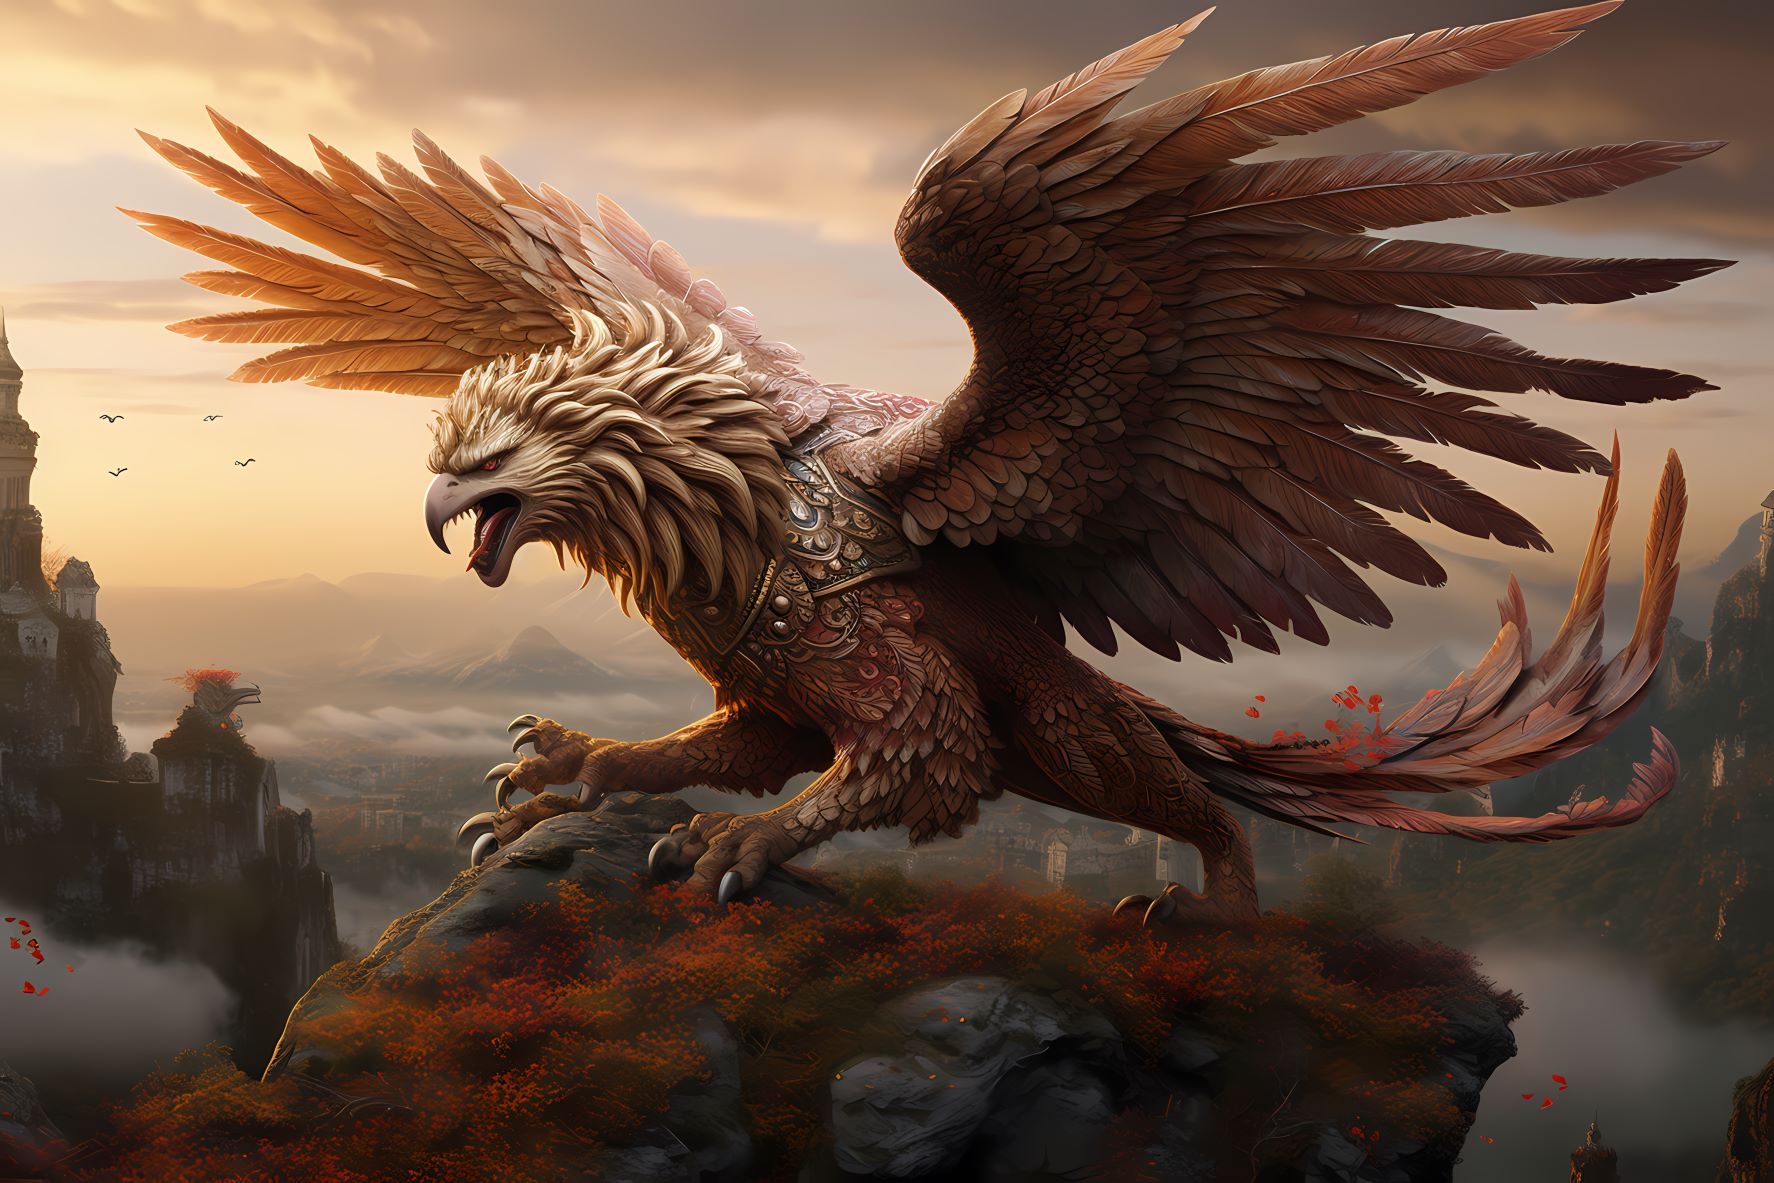 The Griffin: A Legendary Icon with Enduring Popularity!